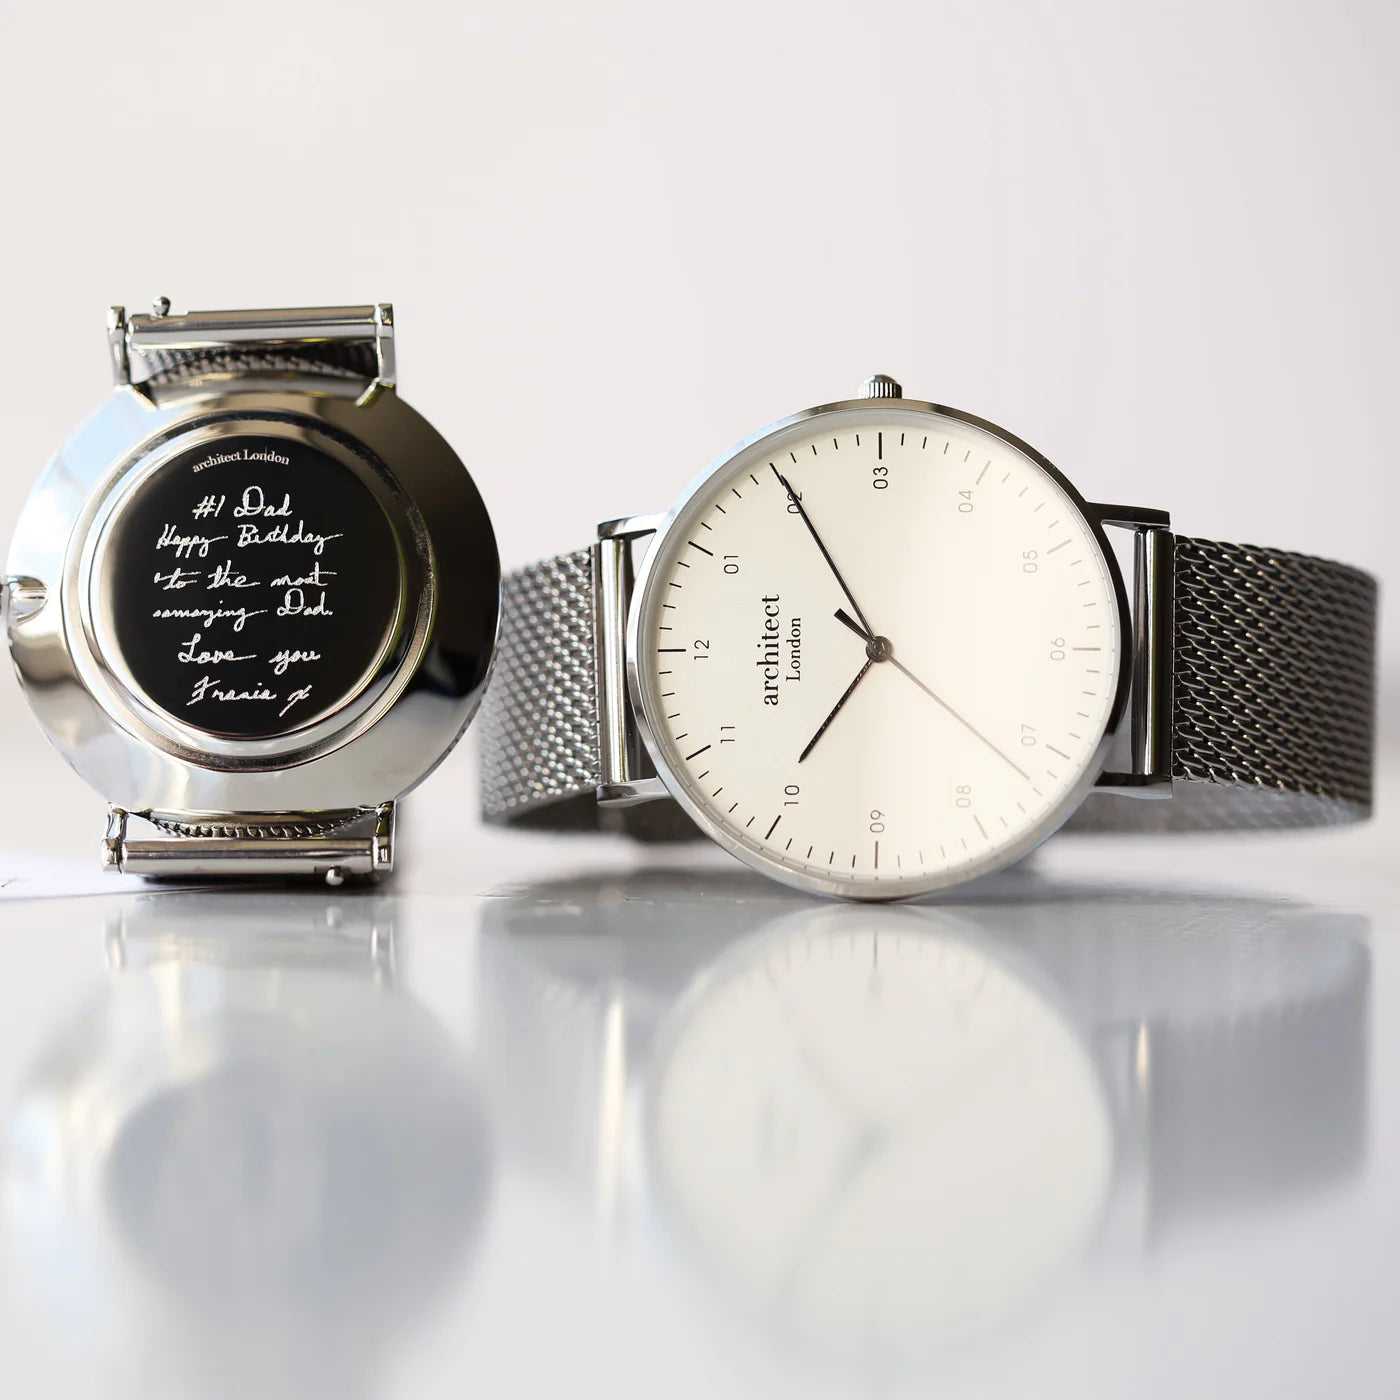 Image of a men's Architect Zephyr watch with a white face and a stainless streel mesh strap. The back of the watch can be engraved with your own handwritten message or drawing.